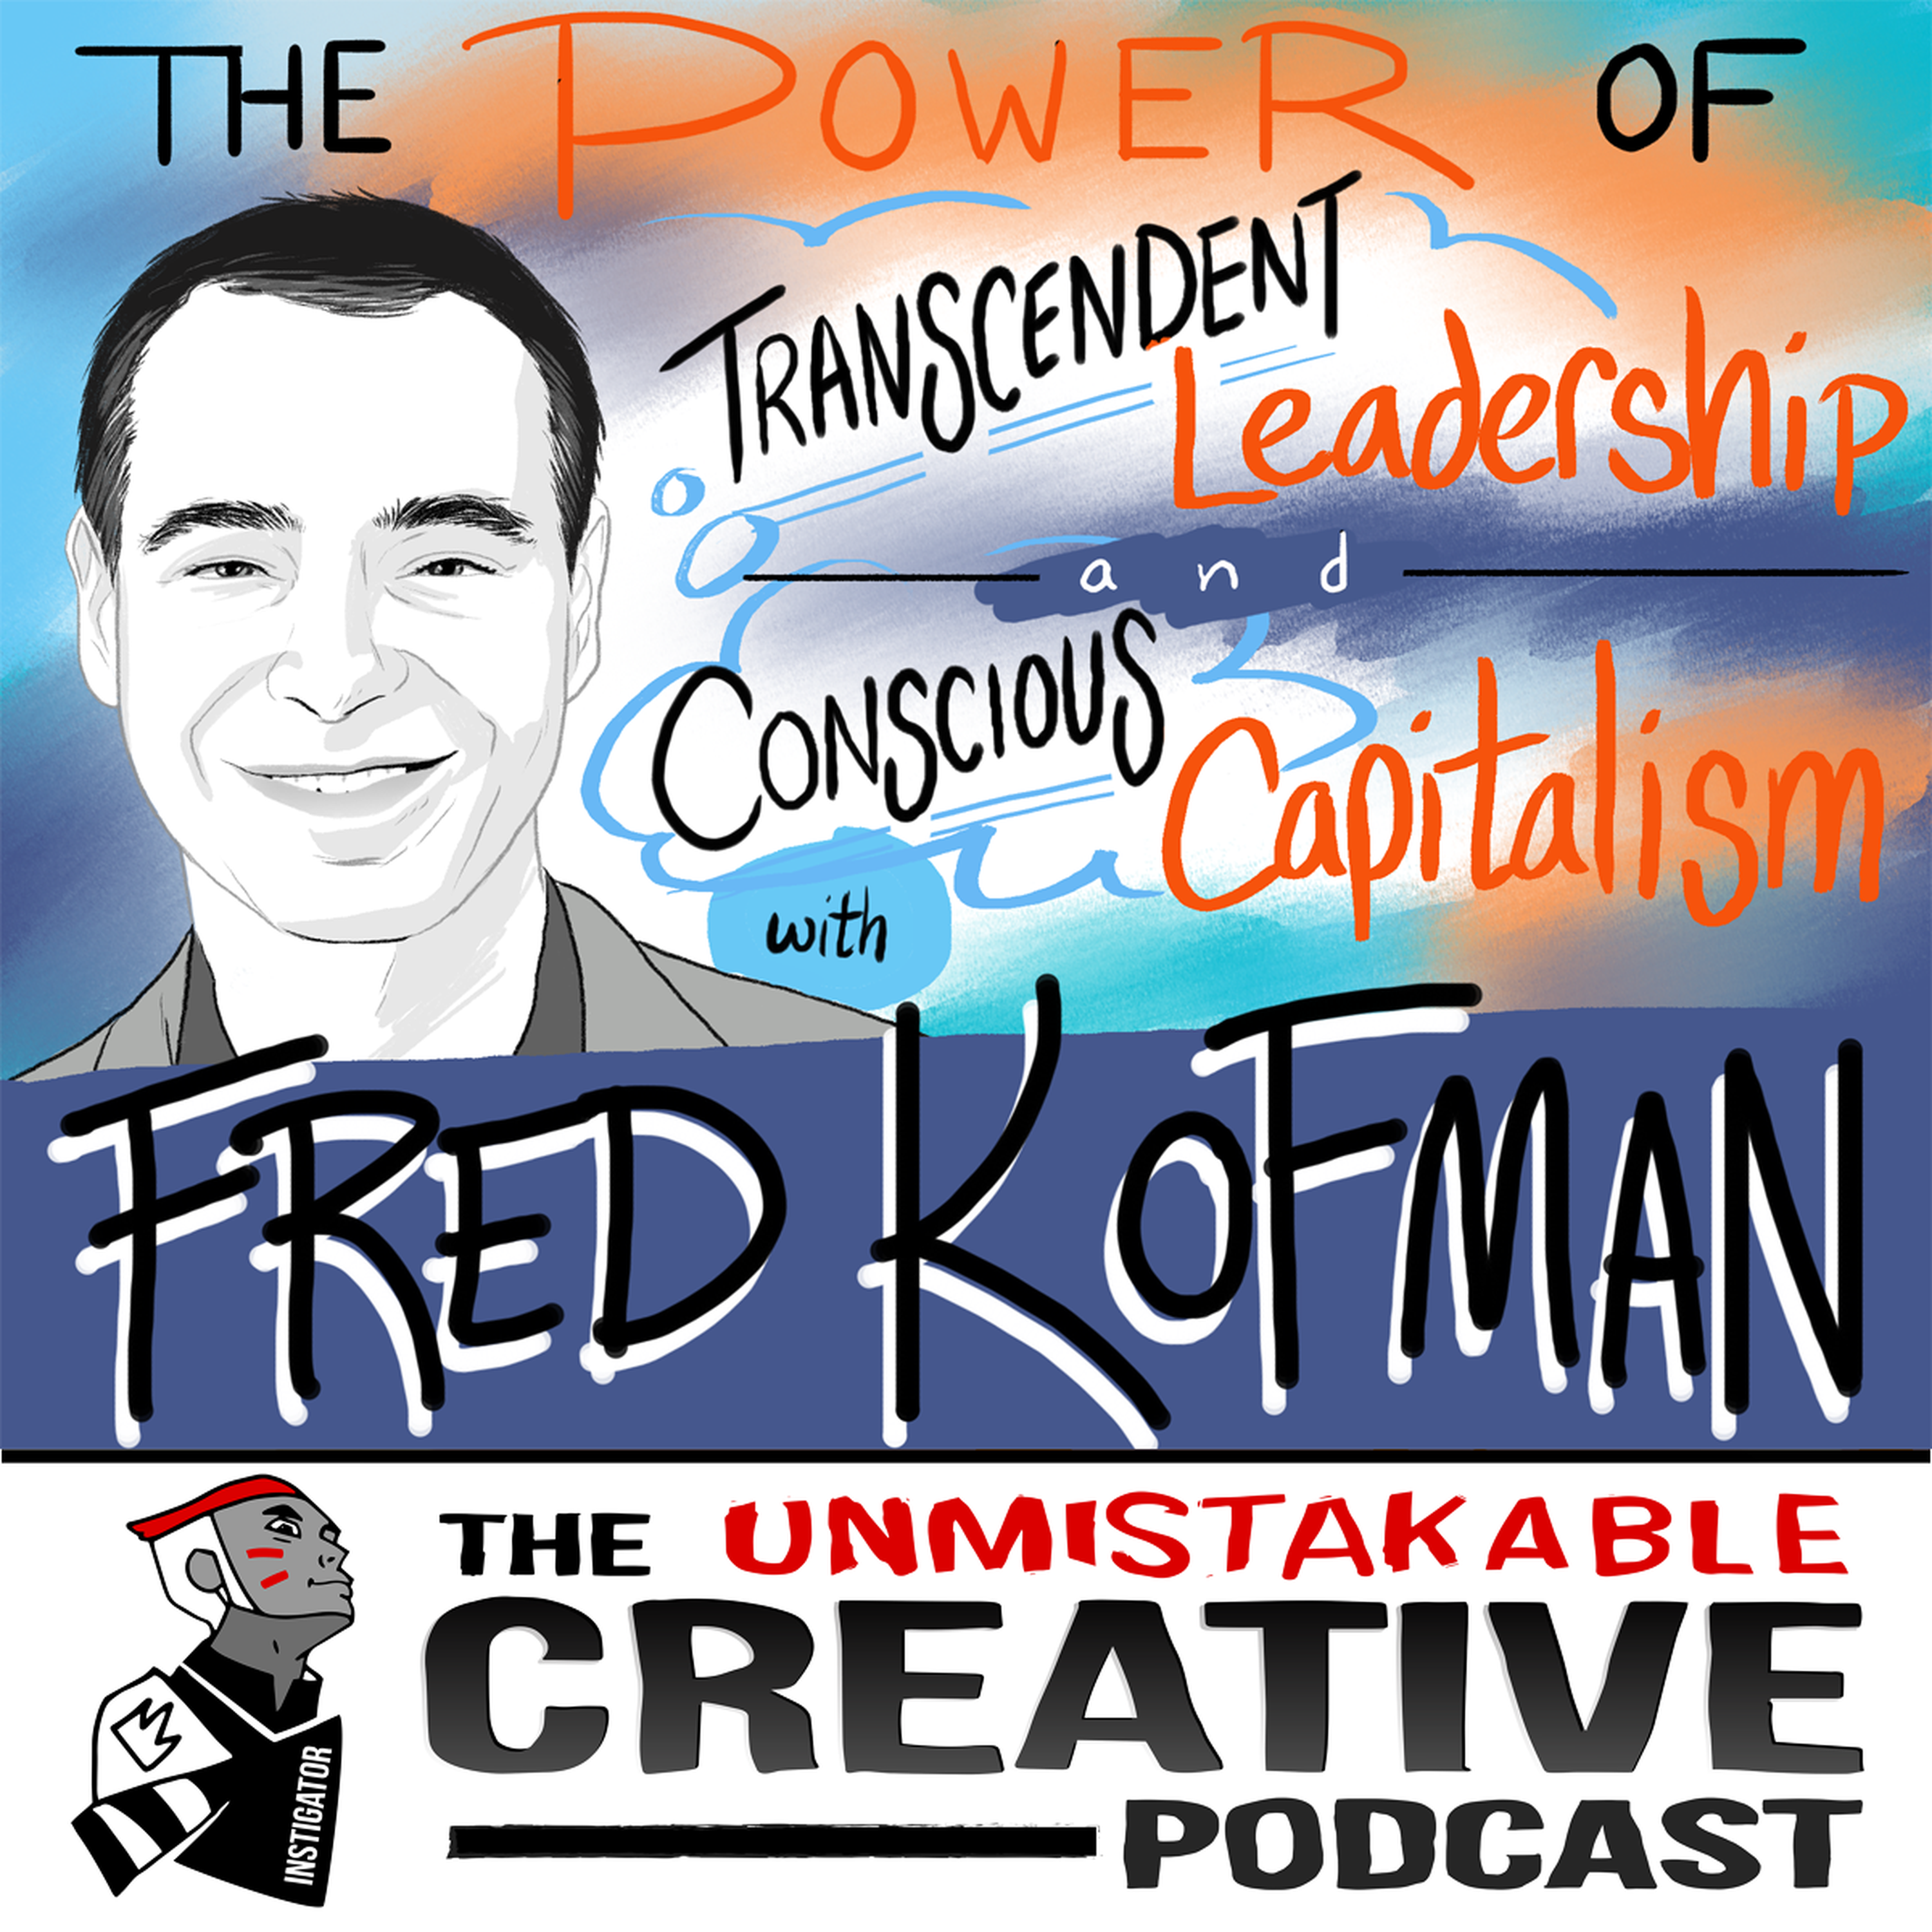 The Power of Transcendent Leadership and Conscious Capitalism with Fred Kofman Image